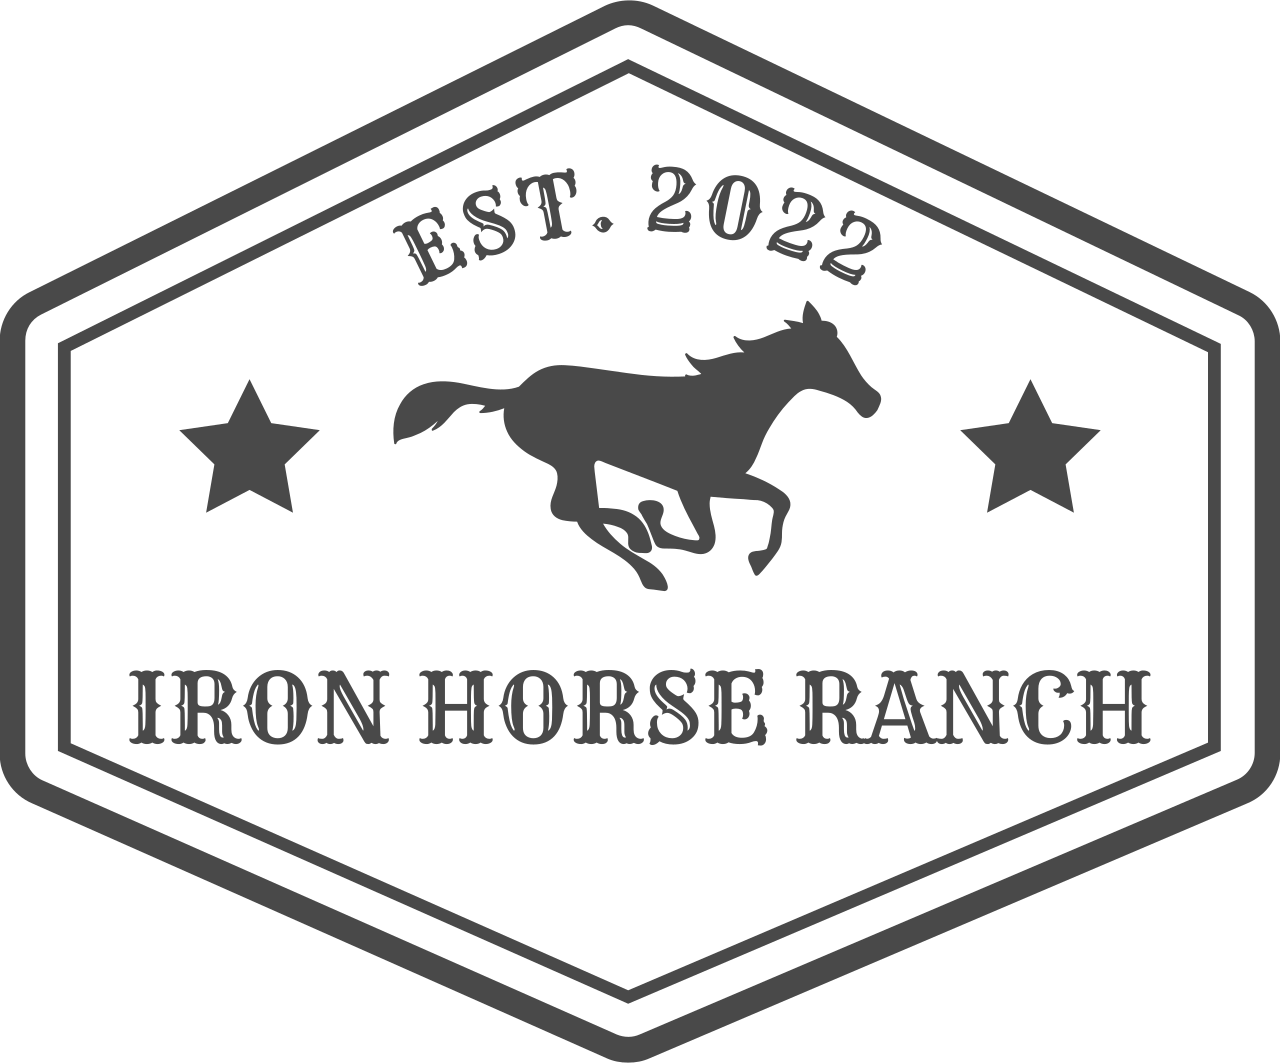 IRON HORSE RANCH's web page